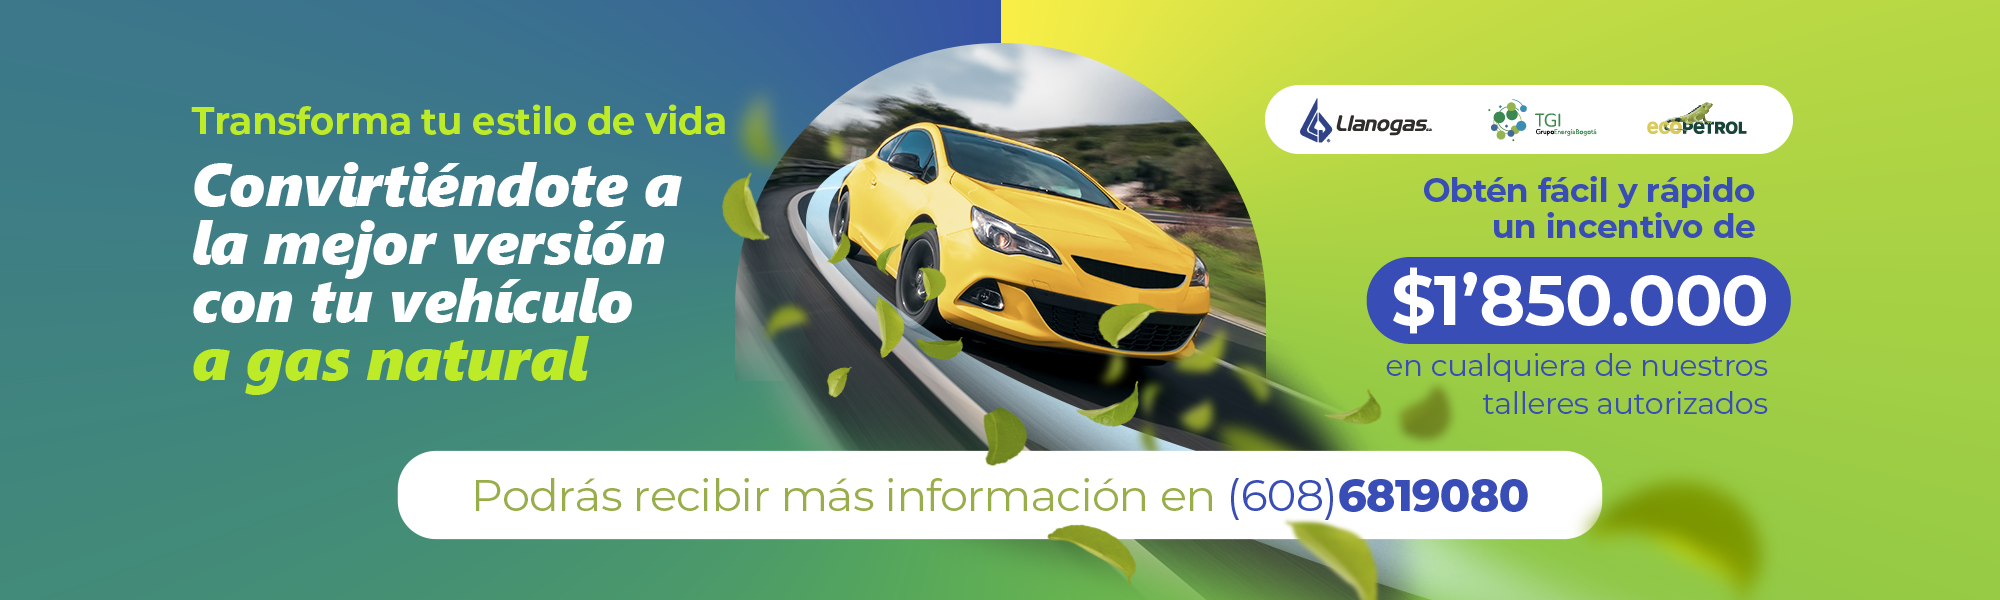 Conversiones vehiculares a gas natural